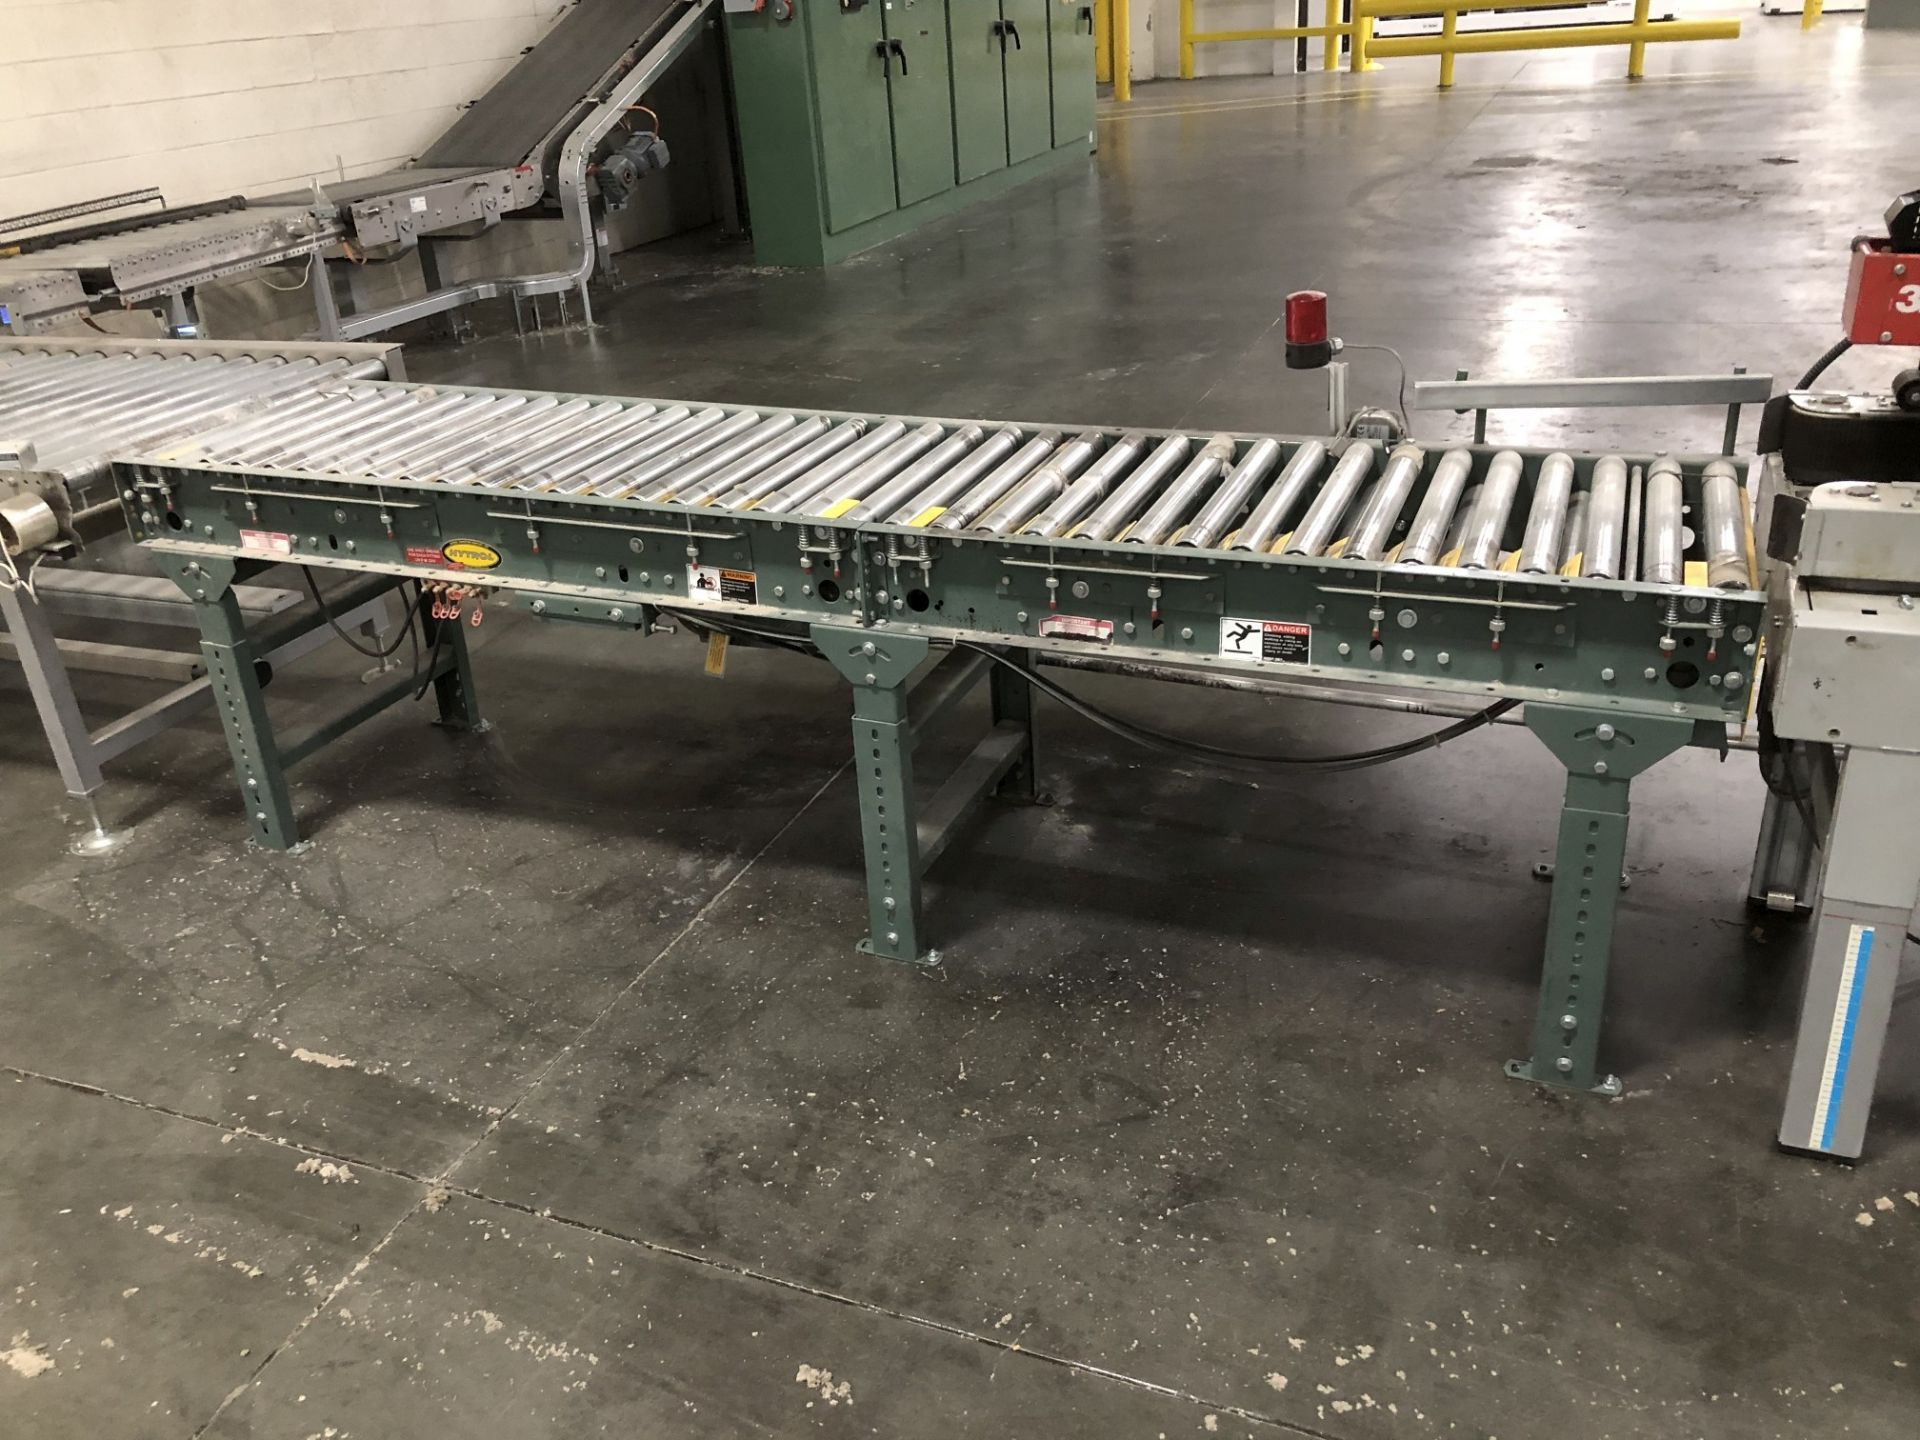 All Hytrol Conveyor Throughout Entire Site, Mostly 20" Wide Powered Roller Conveyor [Please - Image 64 of 80